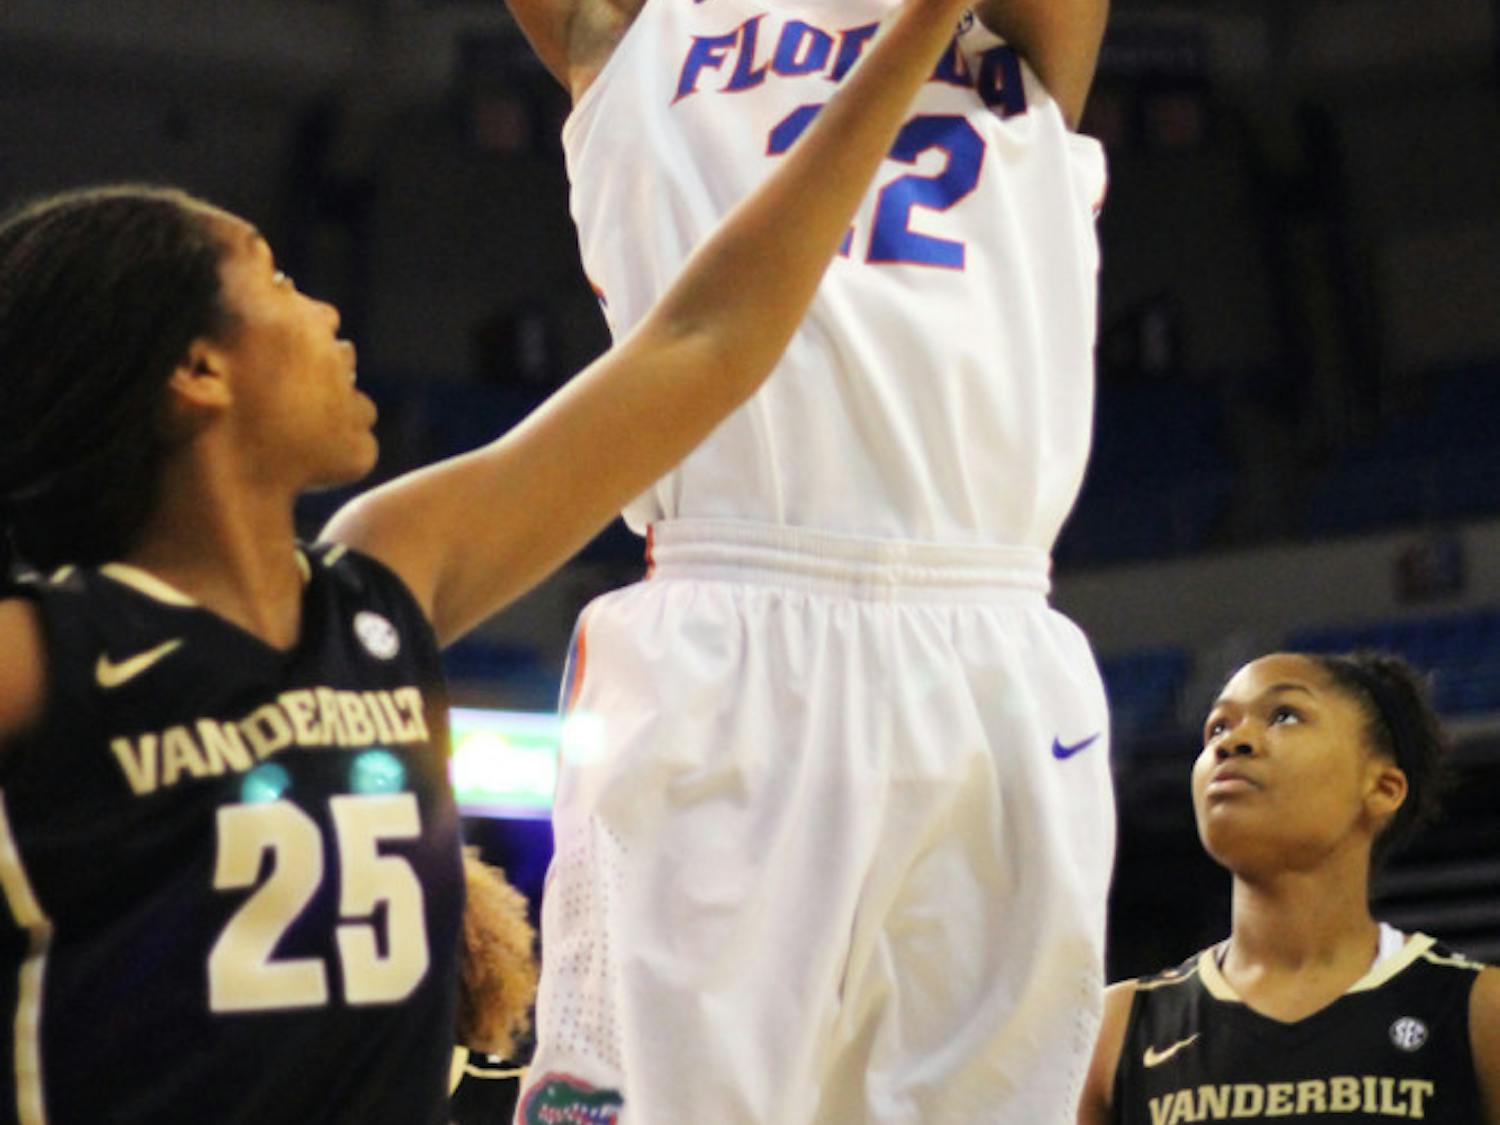 Sophomore Kayla Lewis shoots during Florida’s 68-57 loss to Vanderbilt on Feb. 21 in the O’Connell Center.